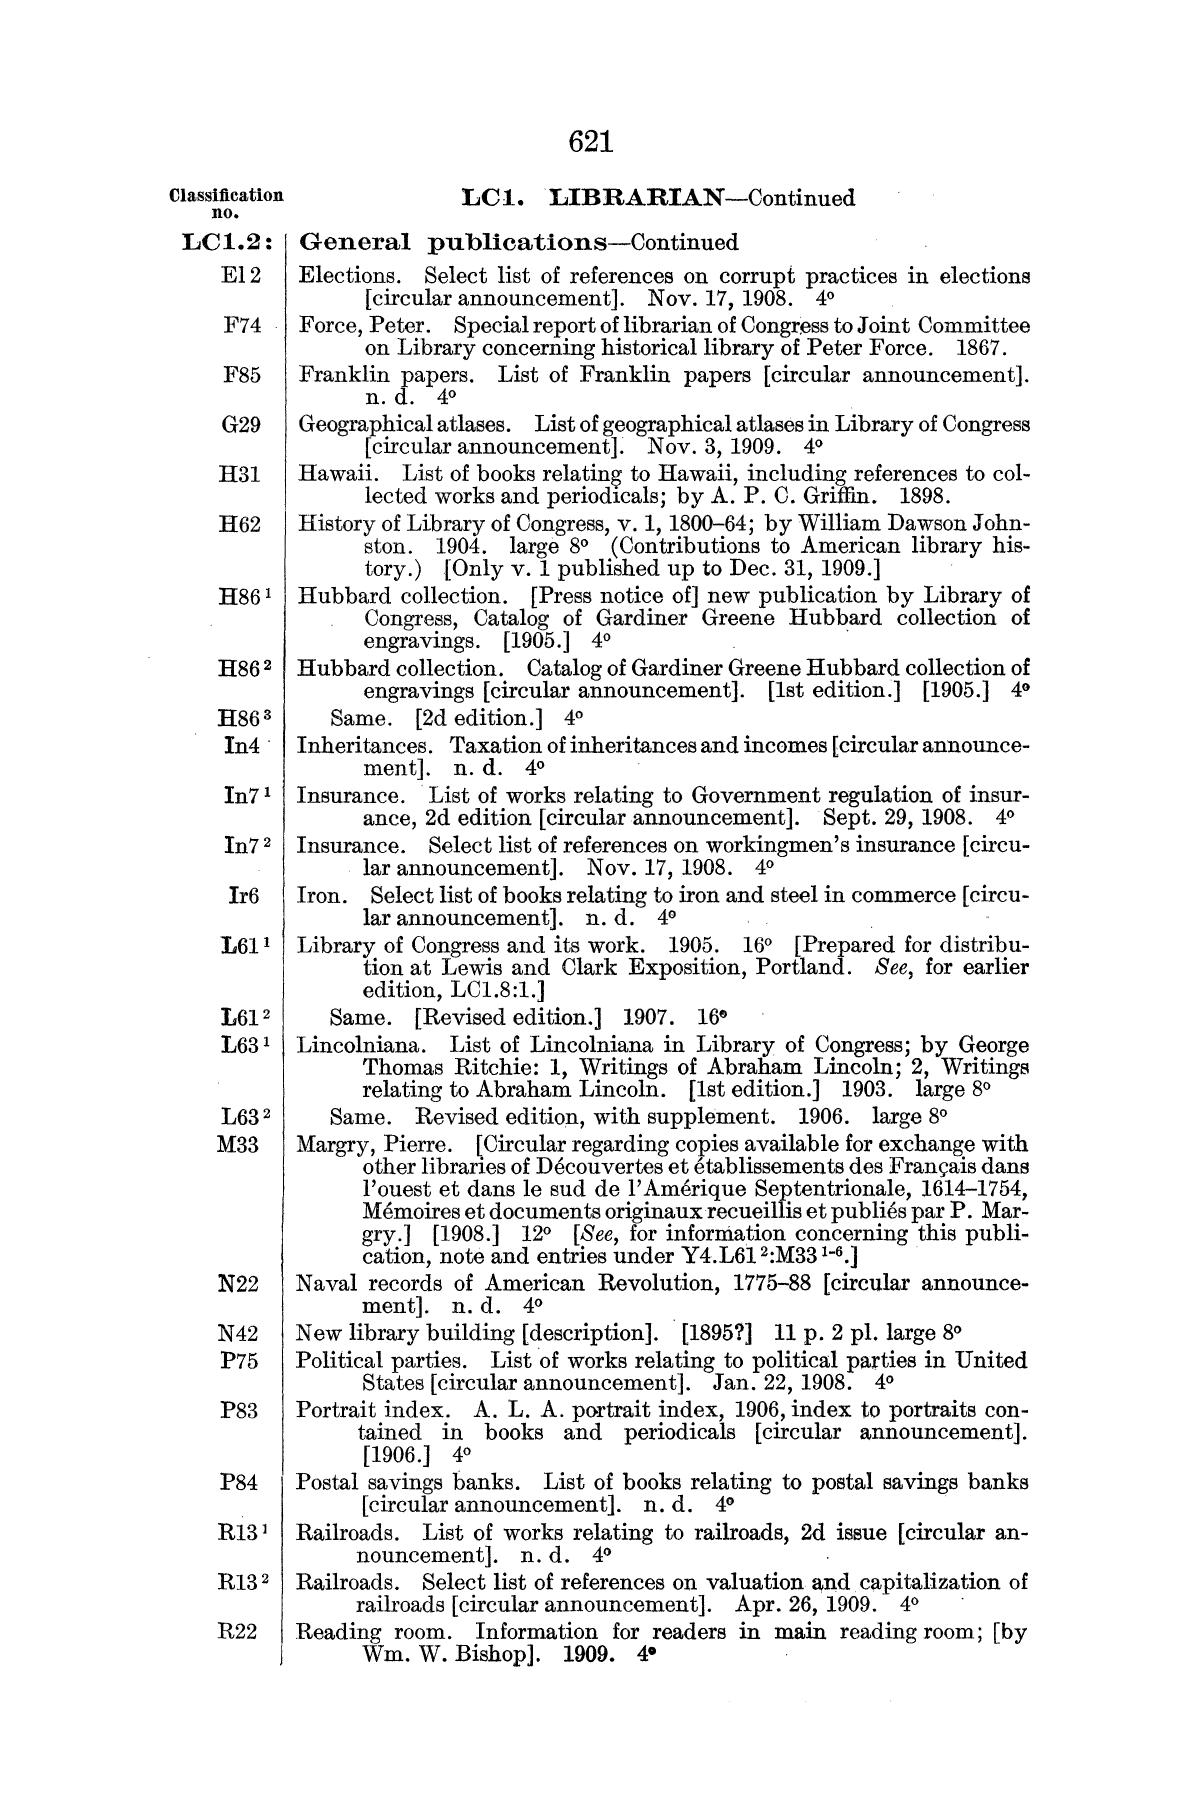 Checklist of United States Public Documents, 1789-1909, Third Edition Revised and Enlarged, Volume 1, Lists of Congressional and Departmental Publications
                                                
                                                    621
                                                